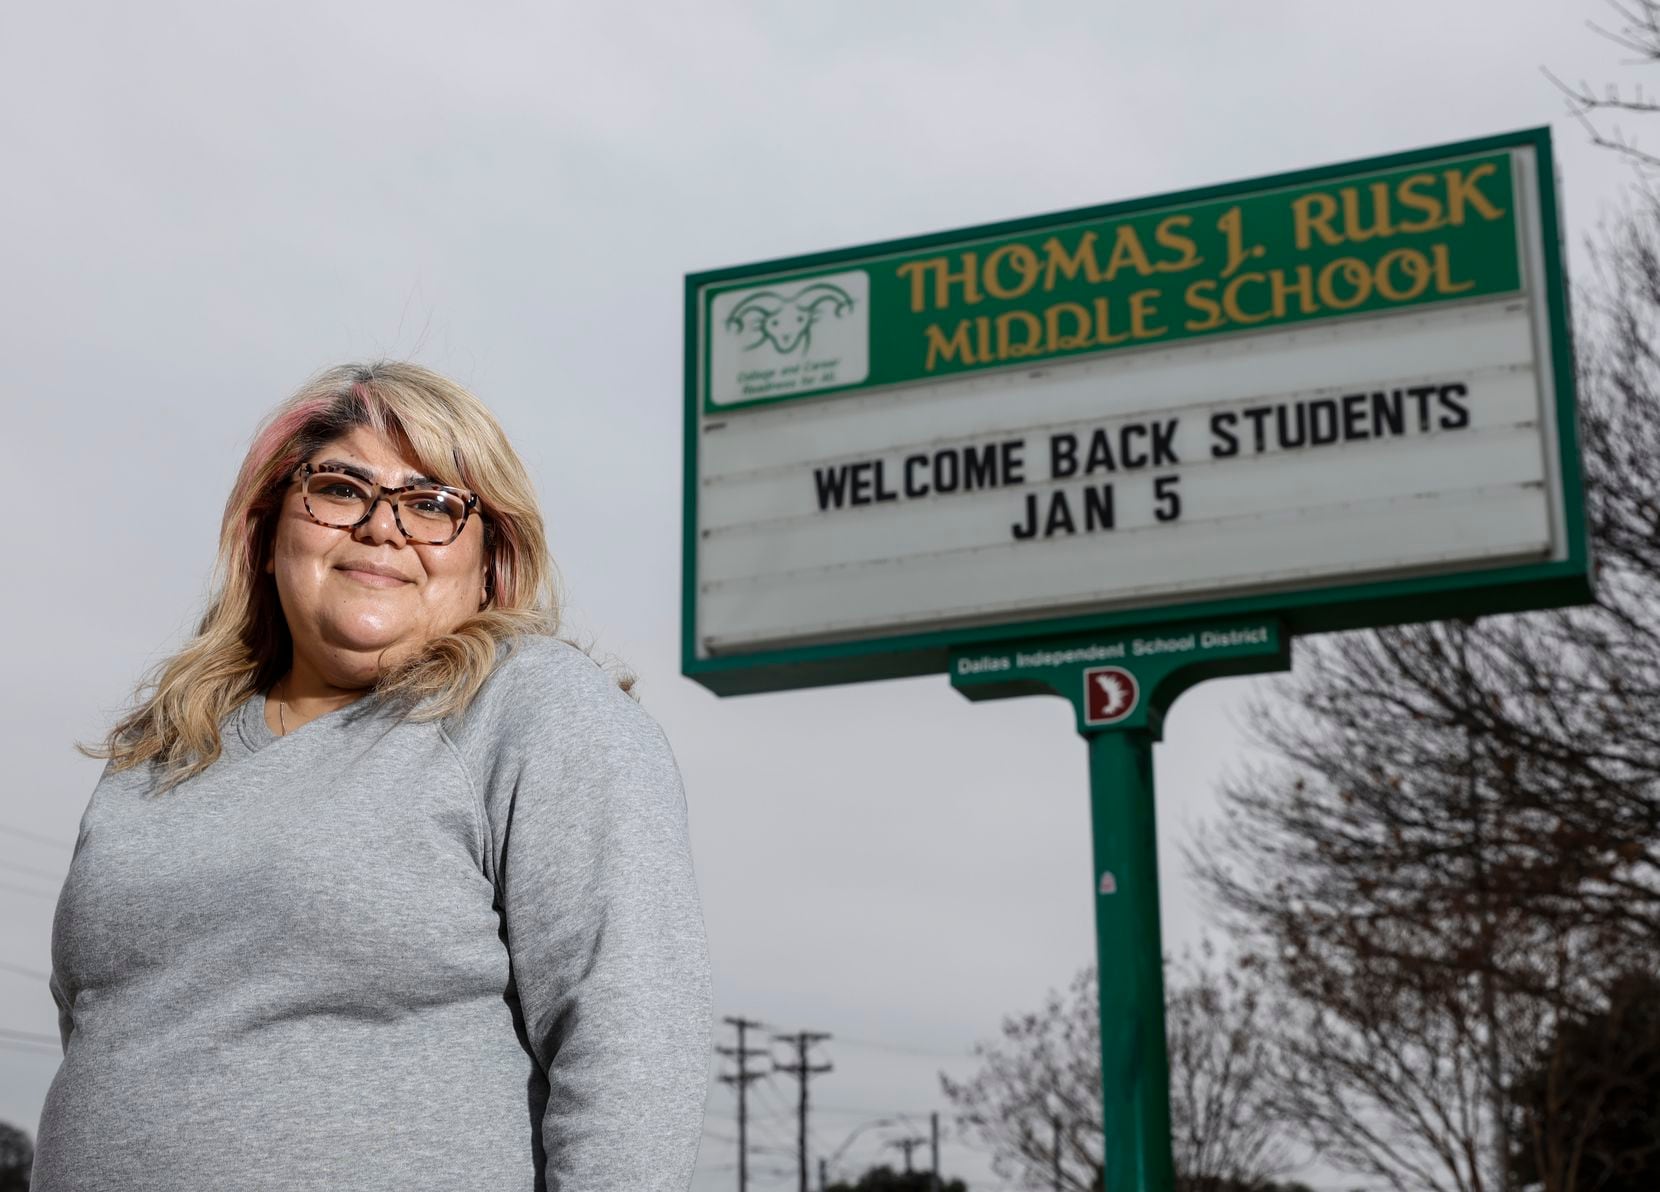 Sandra Roman, a parent of an eighth grader at Thomas J. Rusk Middle School, stood in front...